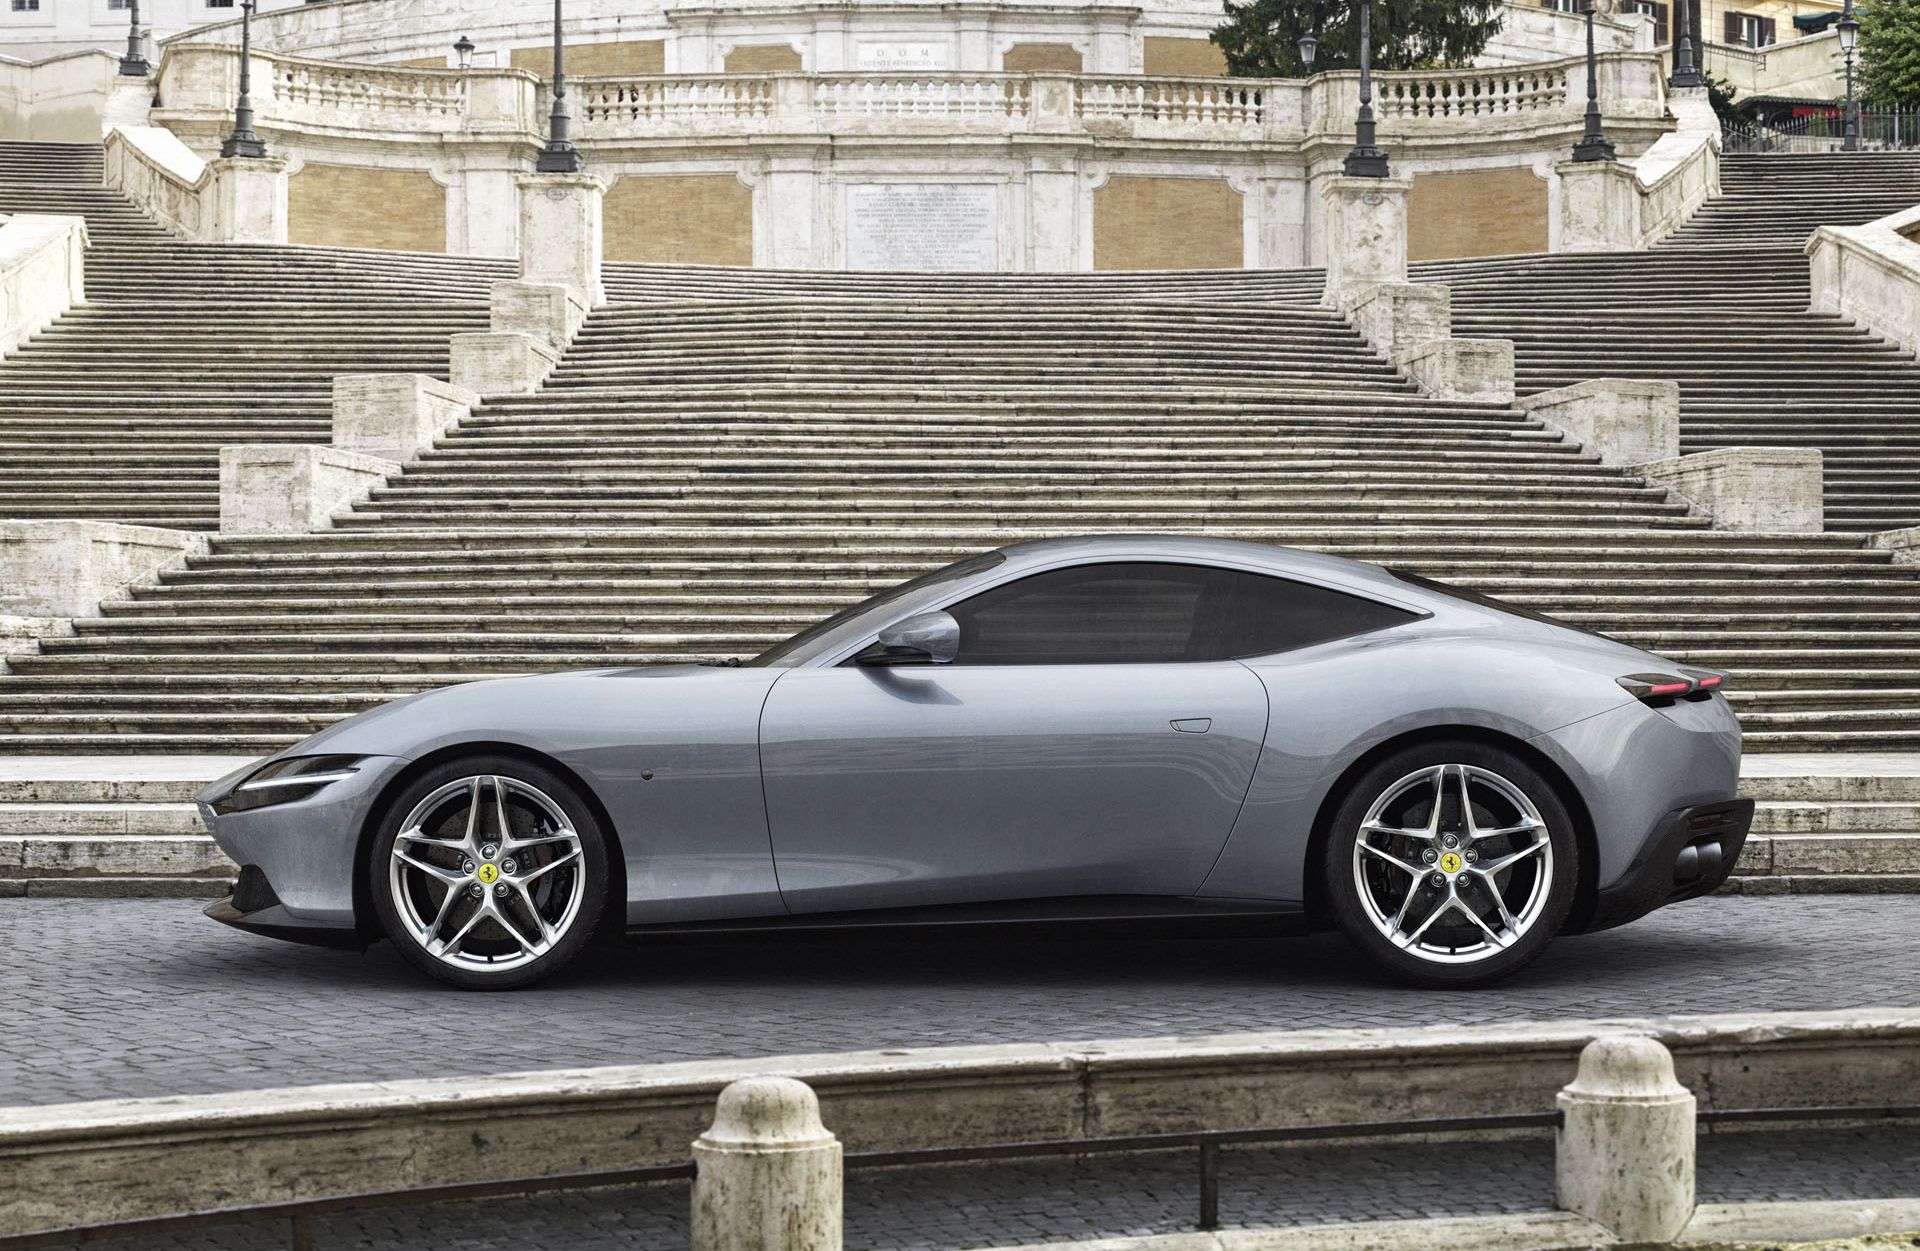 Ferrari's mystery coupe revealed as the Roma